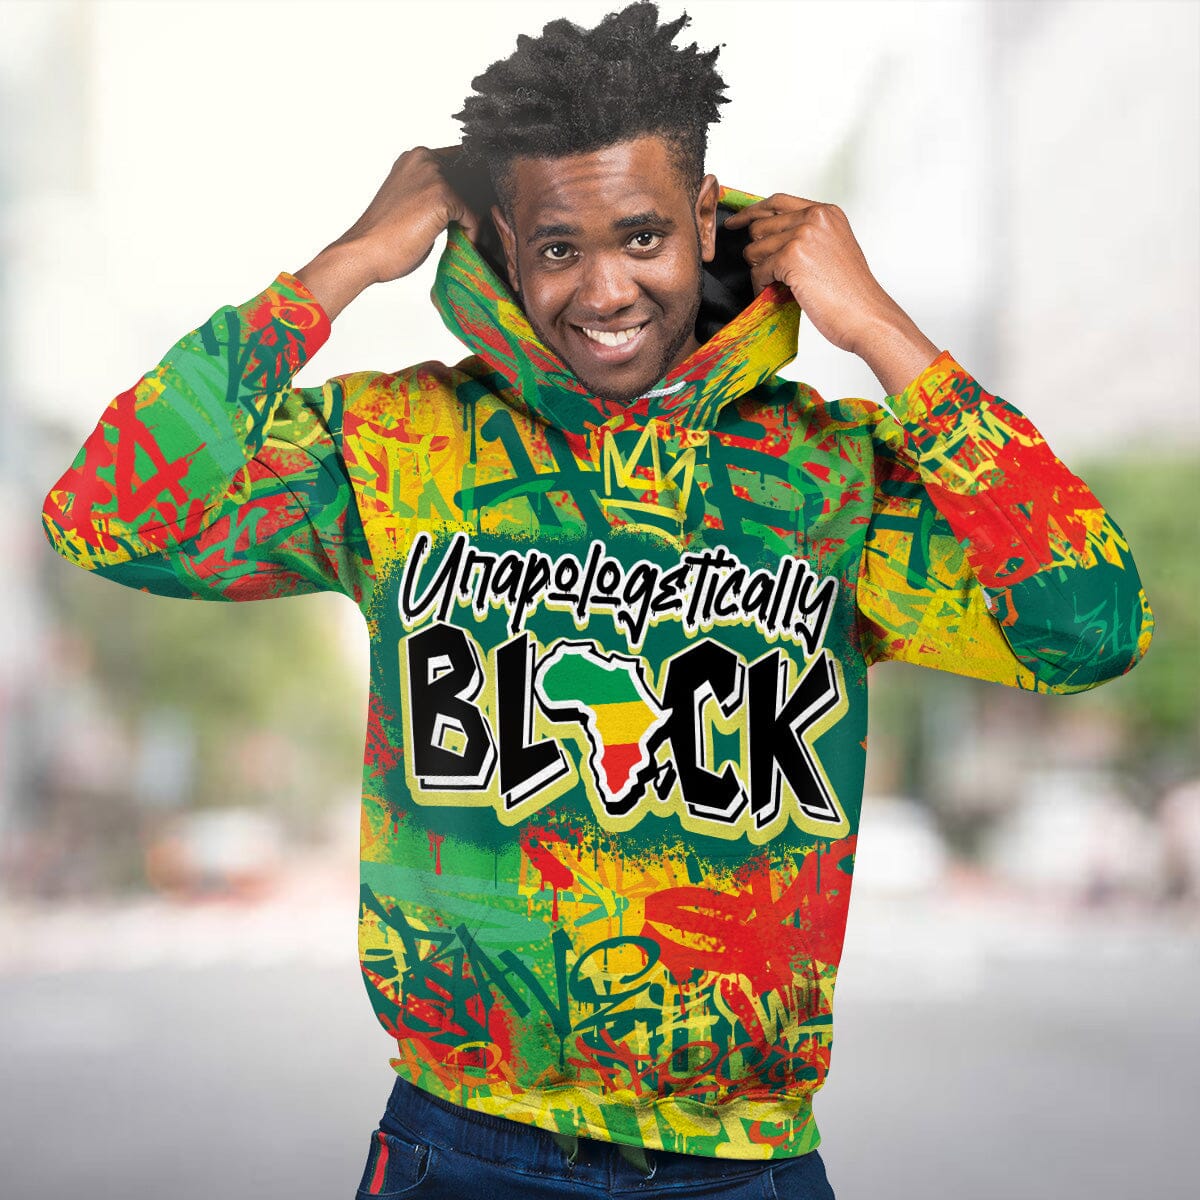 Colorful Unapologetically Black All-over Hoodie Hoodie Tianci 